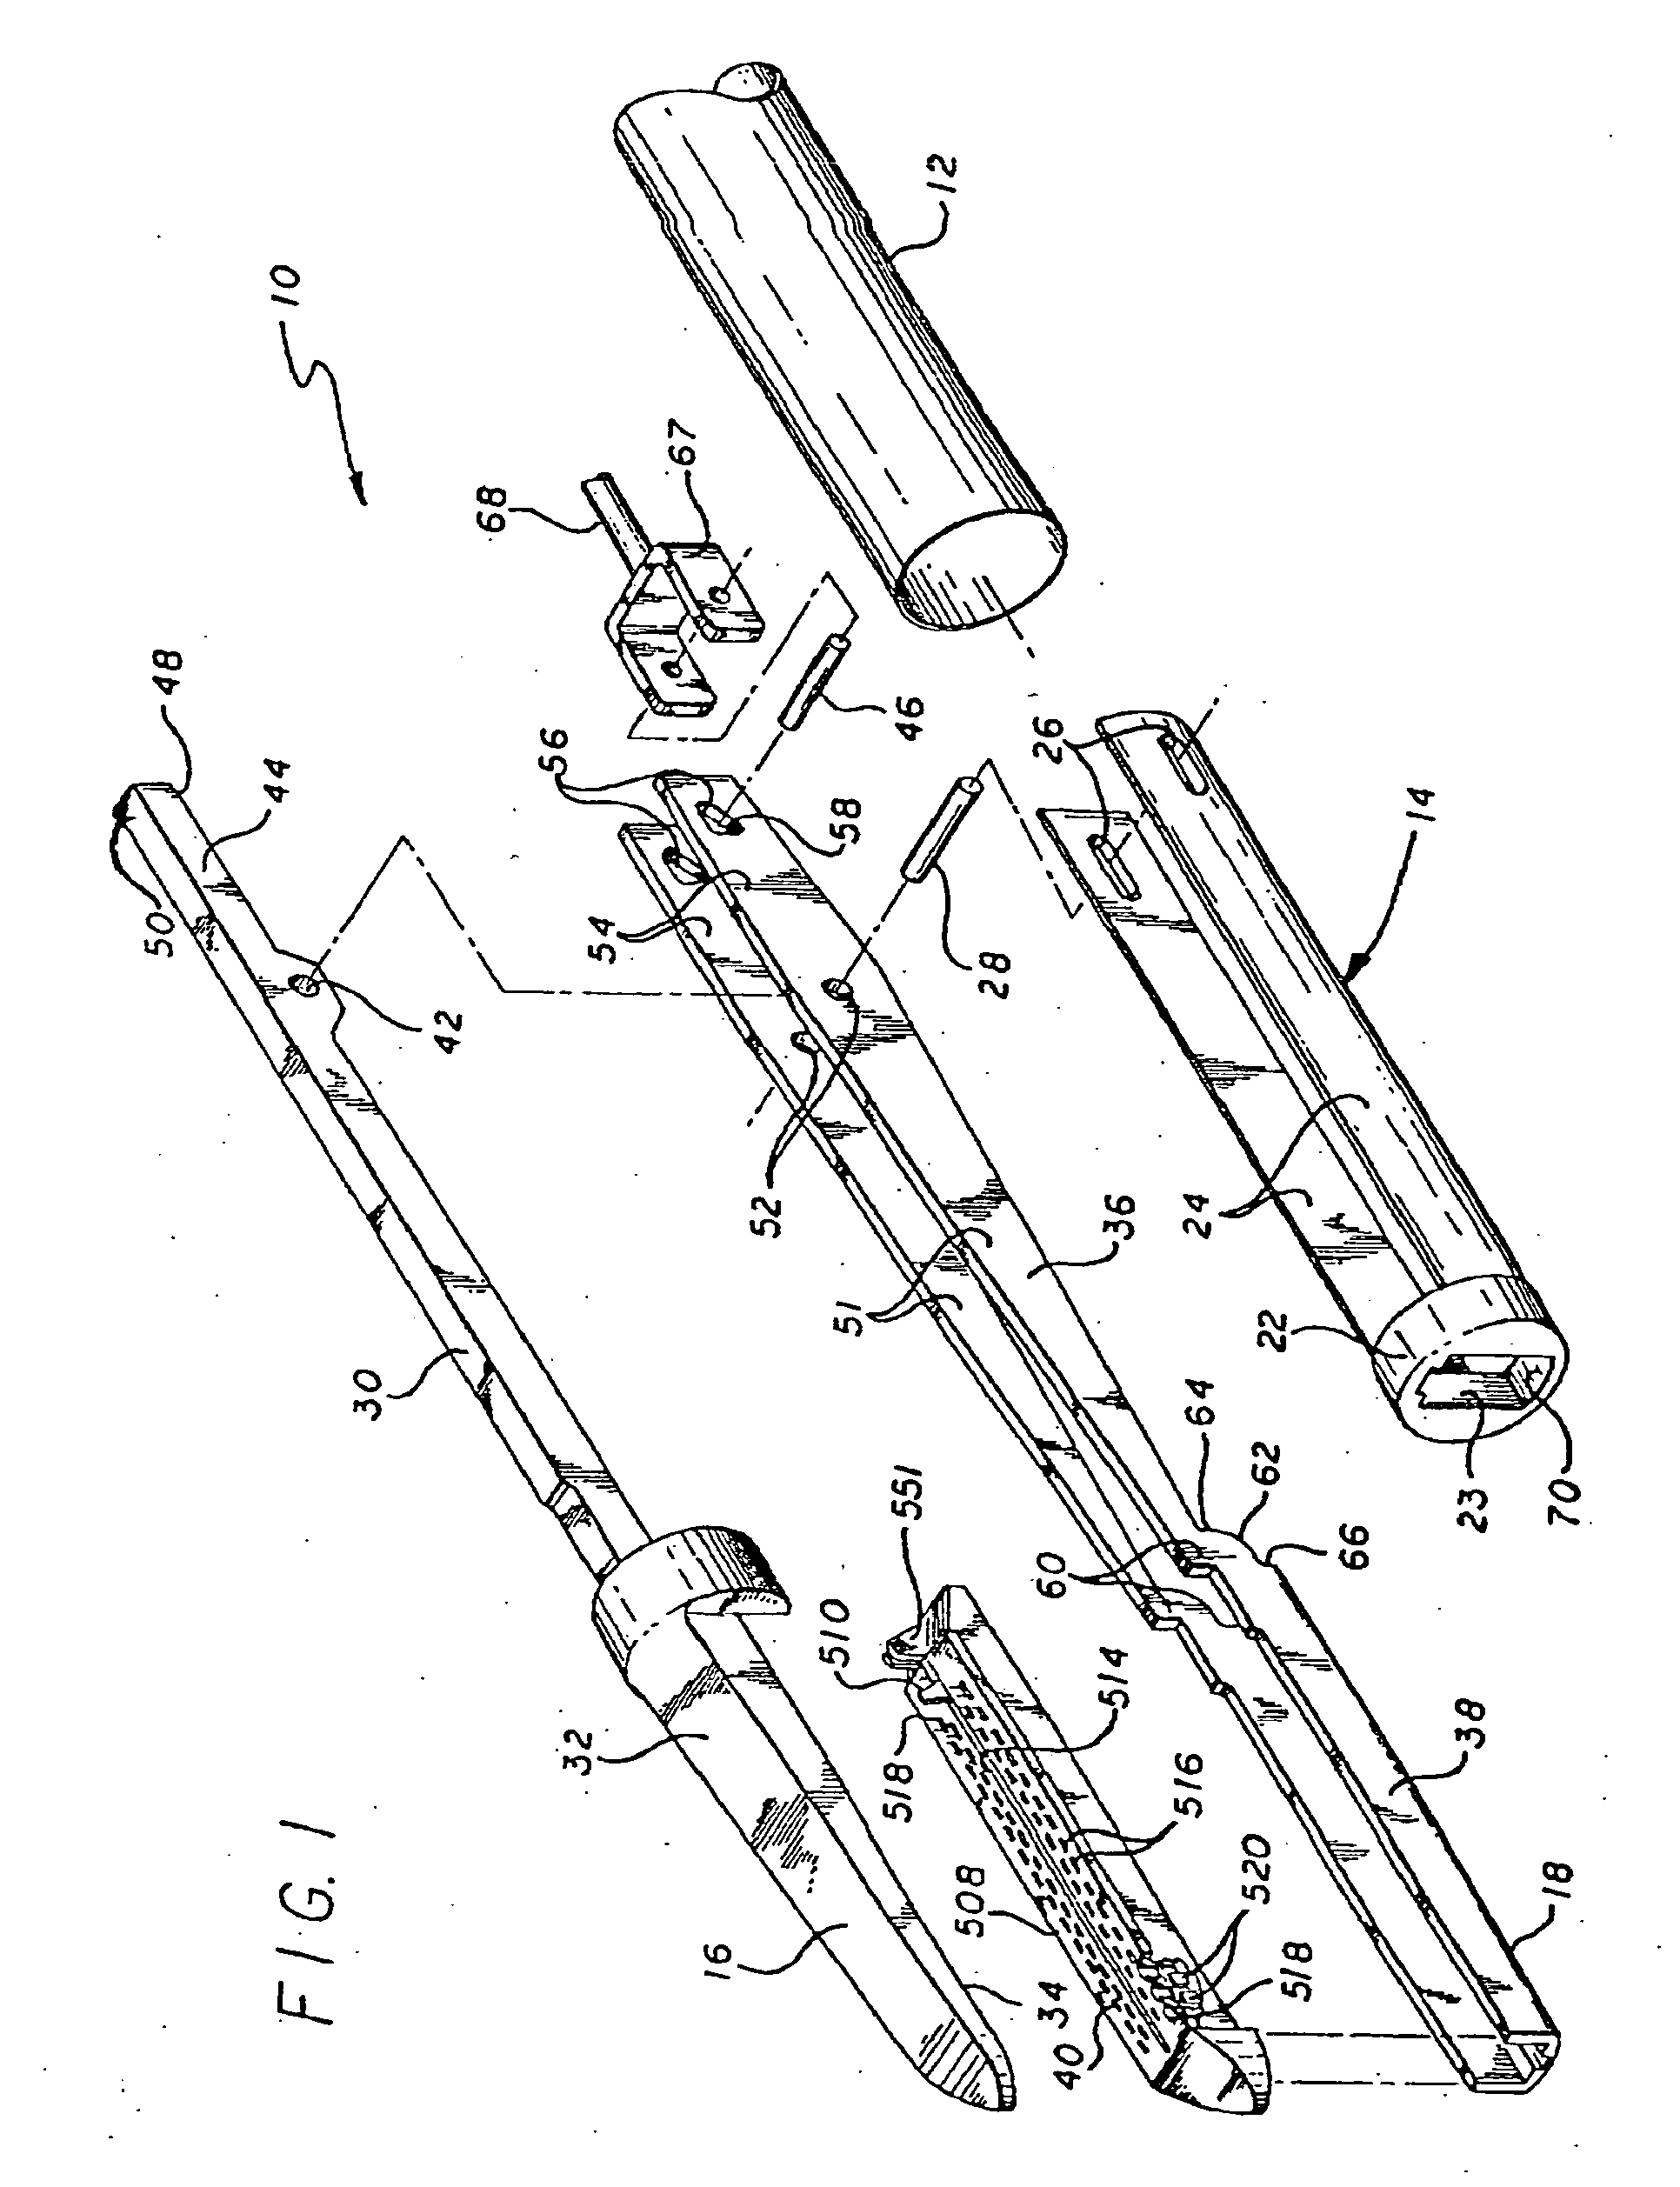 Surgical instrument having an articulated jaw structure and a detachable knife